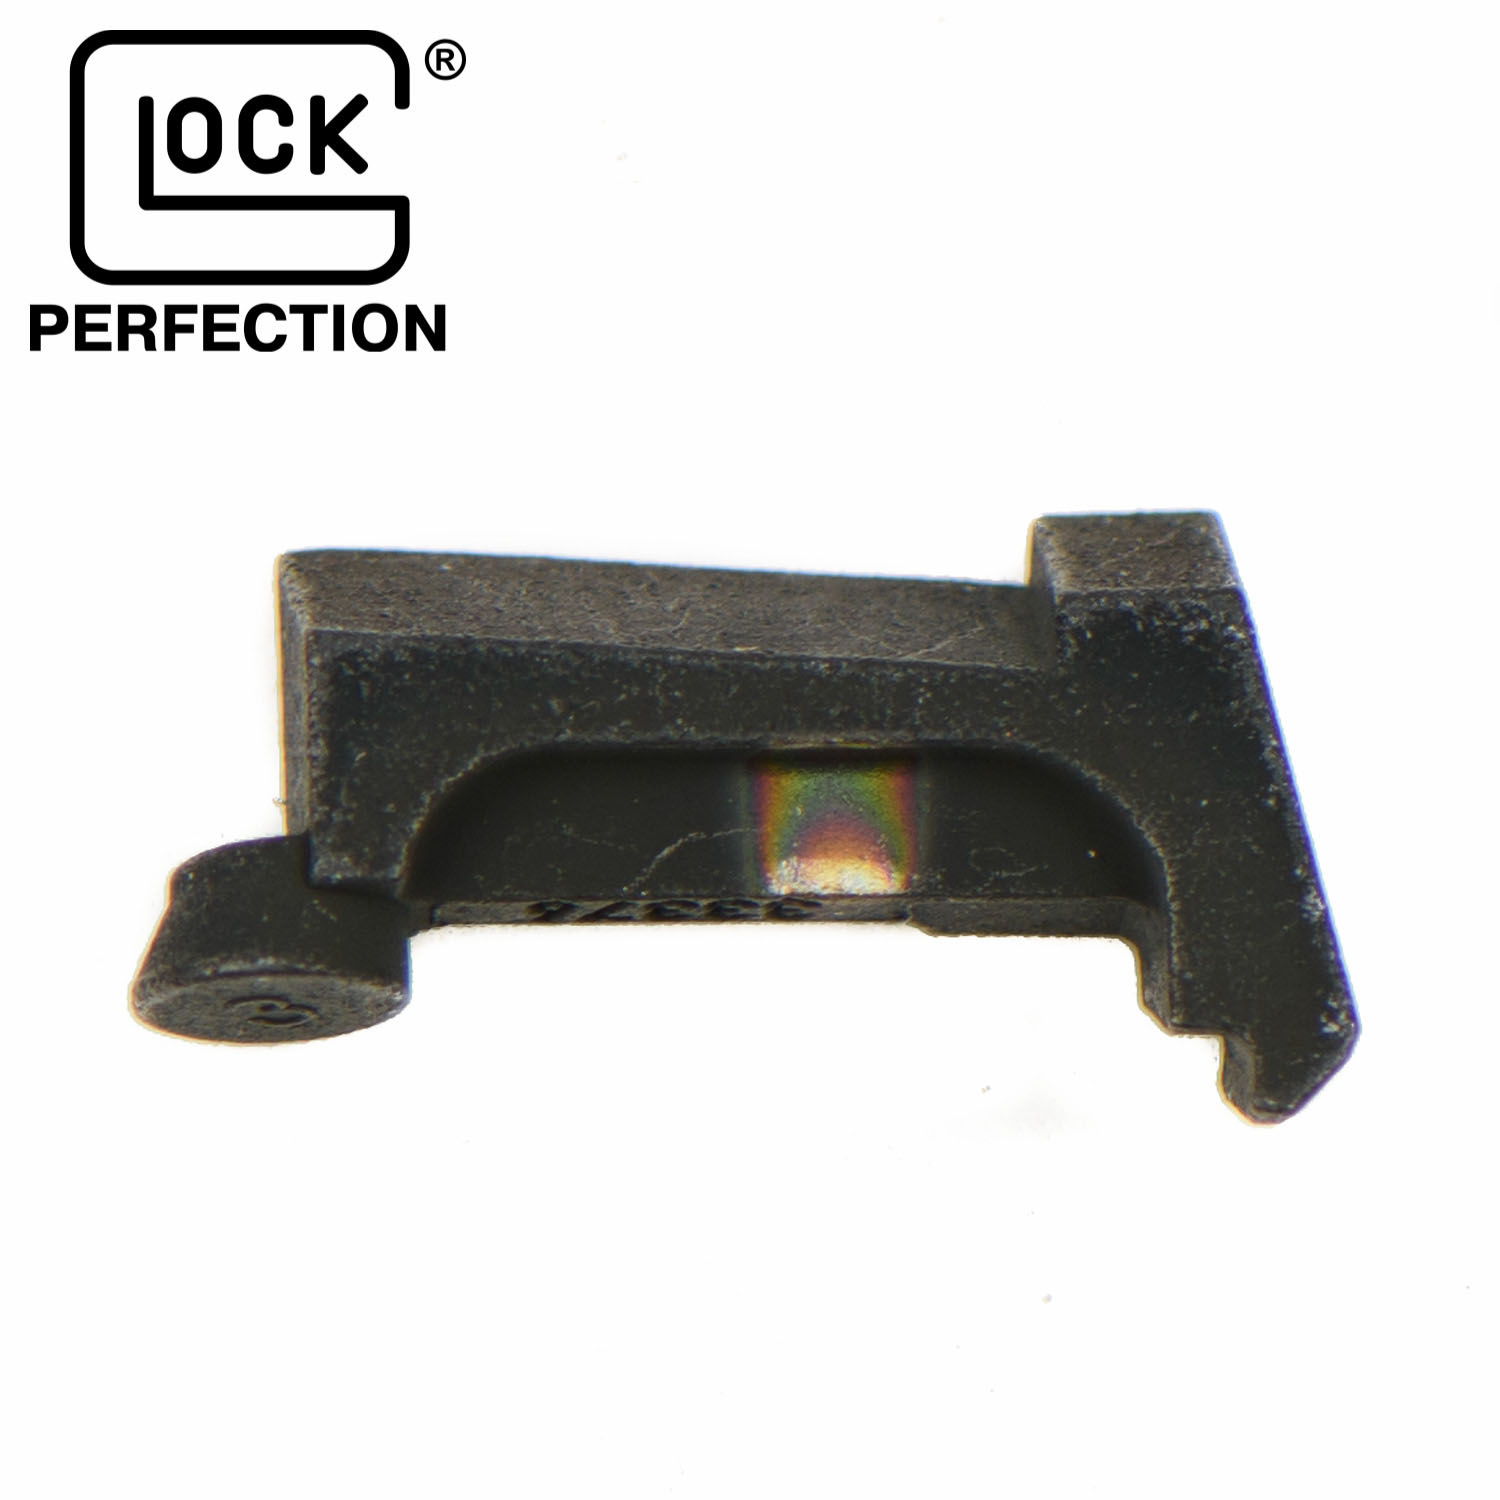 Glock Extractor w/Loaded Chamber Indicator, Best Glock Accessories